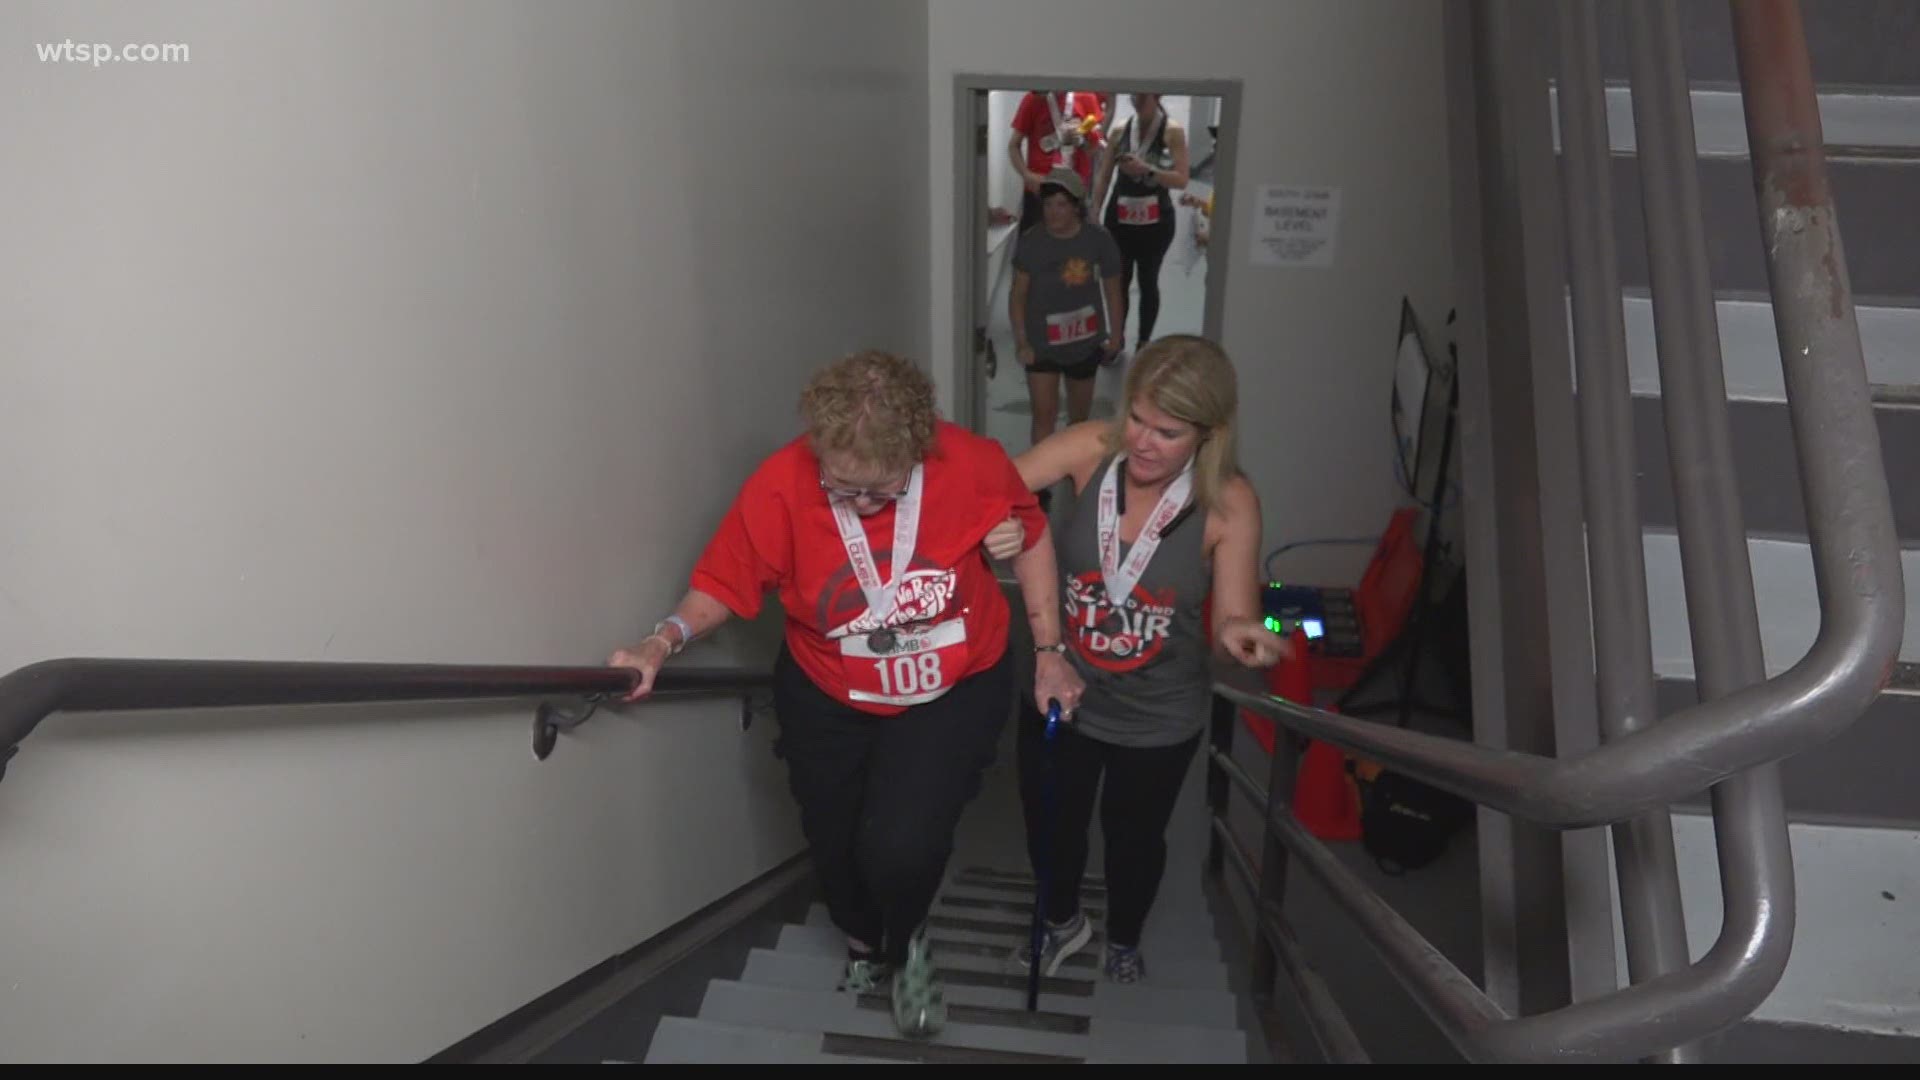 The 15th Annual American Lung Association's Fight for Air Climb is virtual this year and investing $25 million into fighting COVID-19.